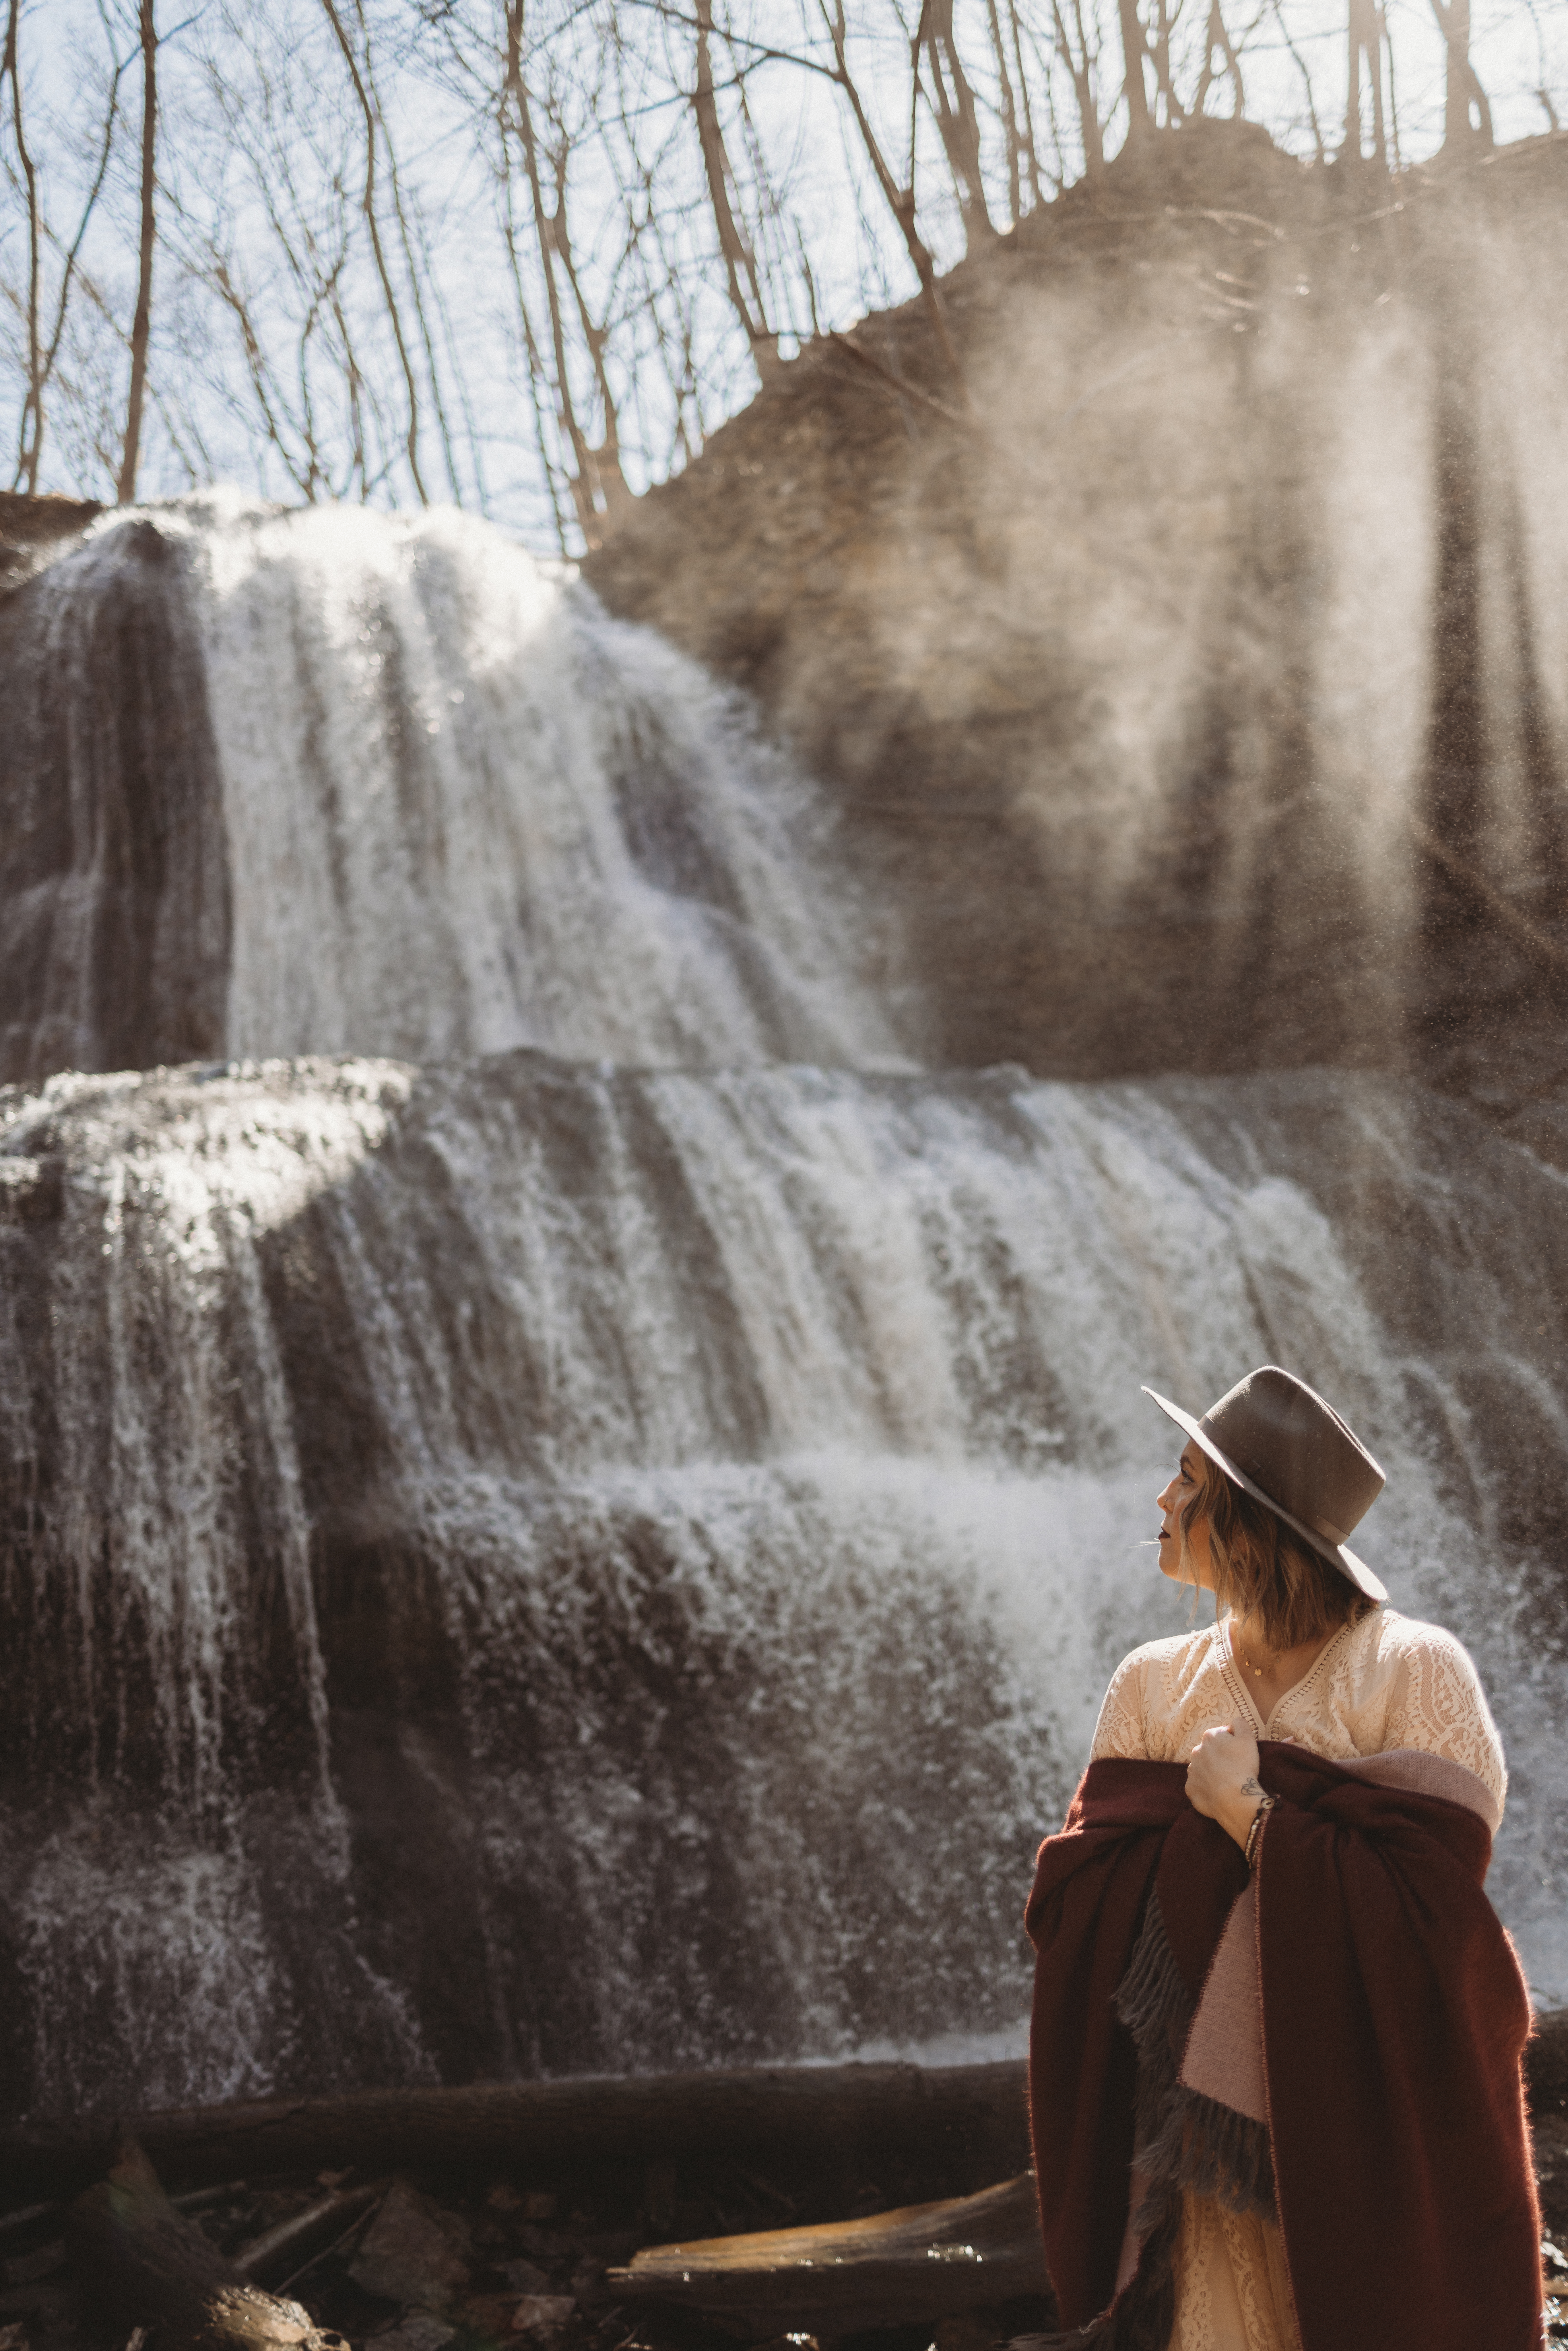 A bride posing at a waterfall for her waterfall wedding adventure elopement